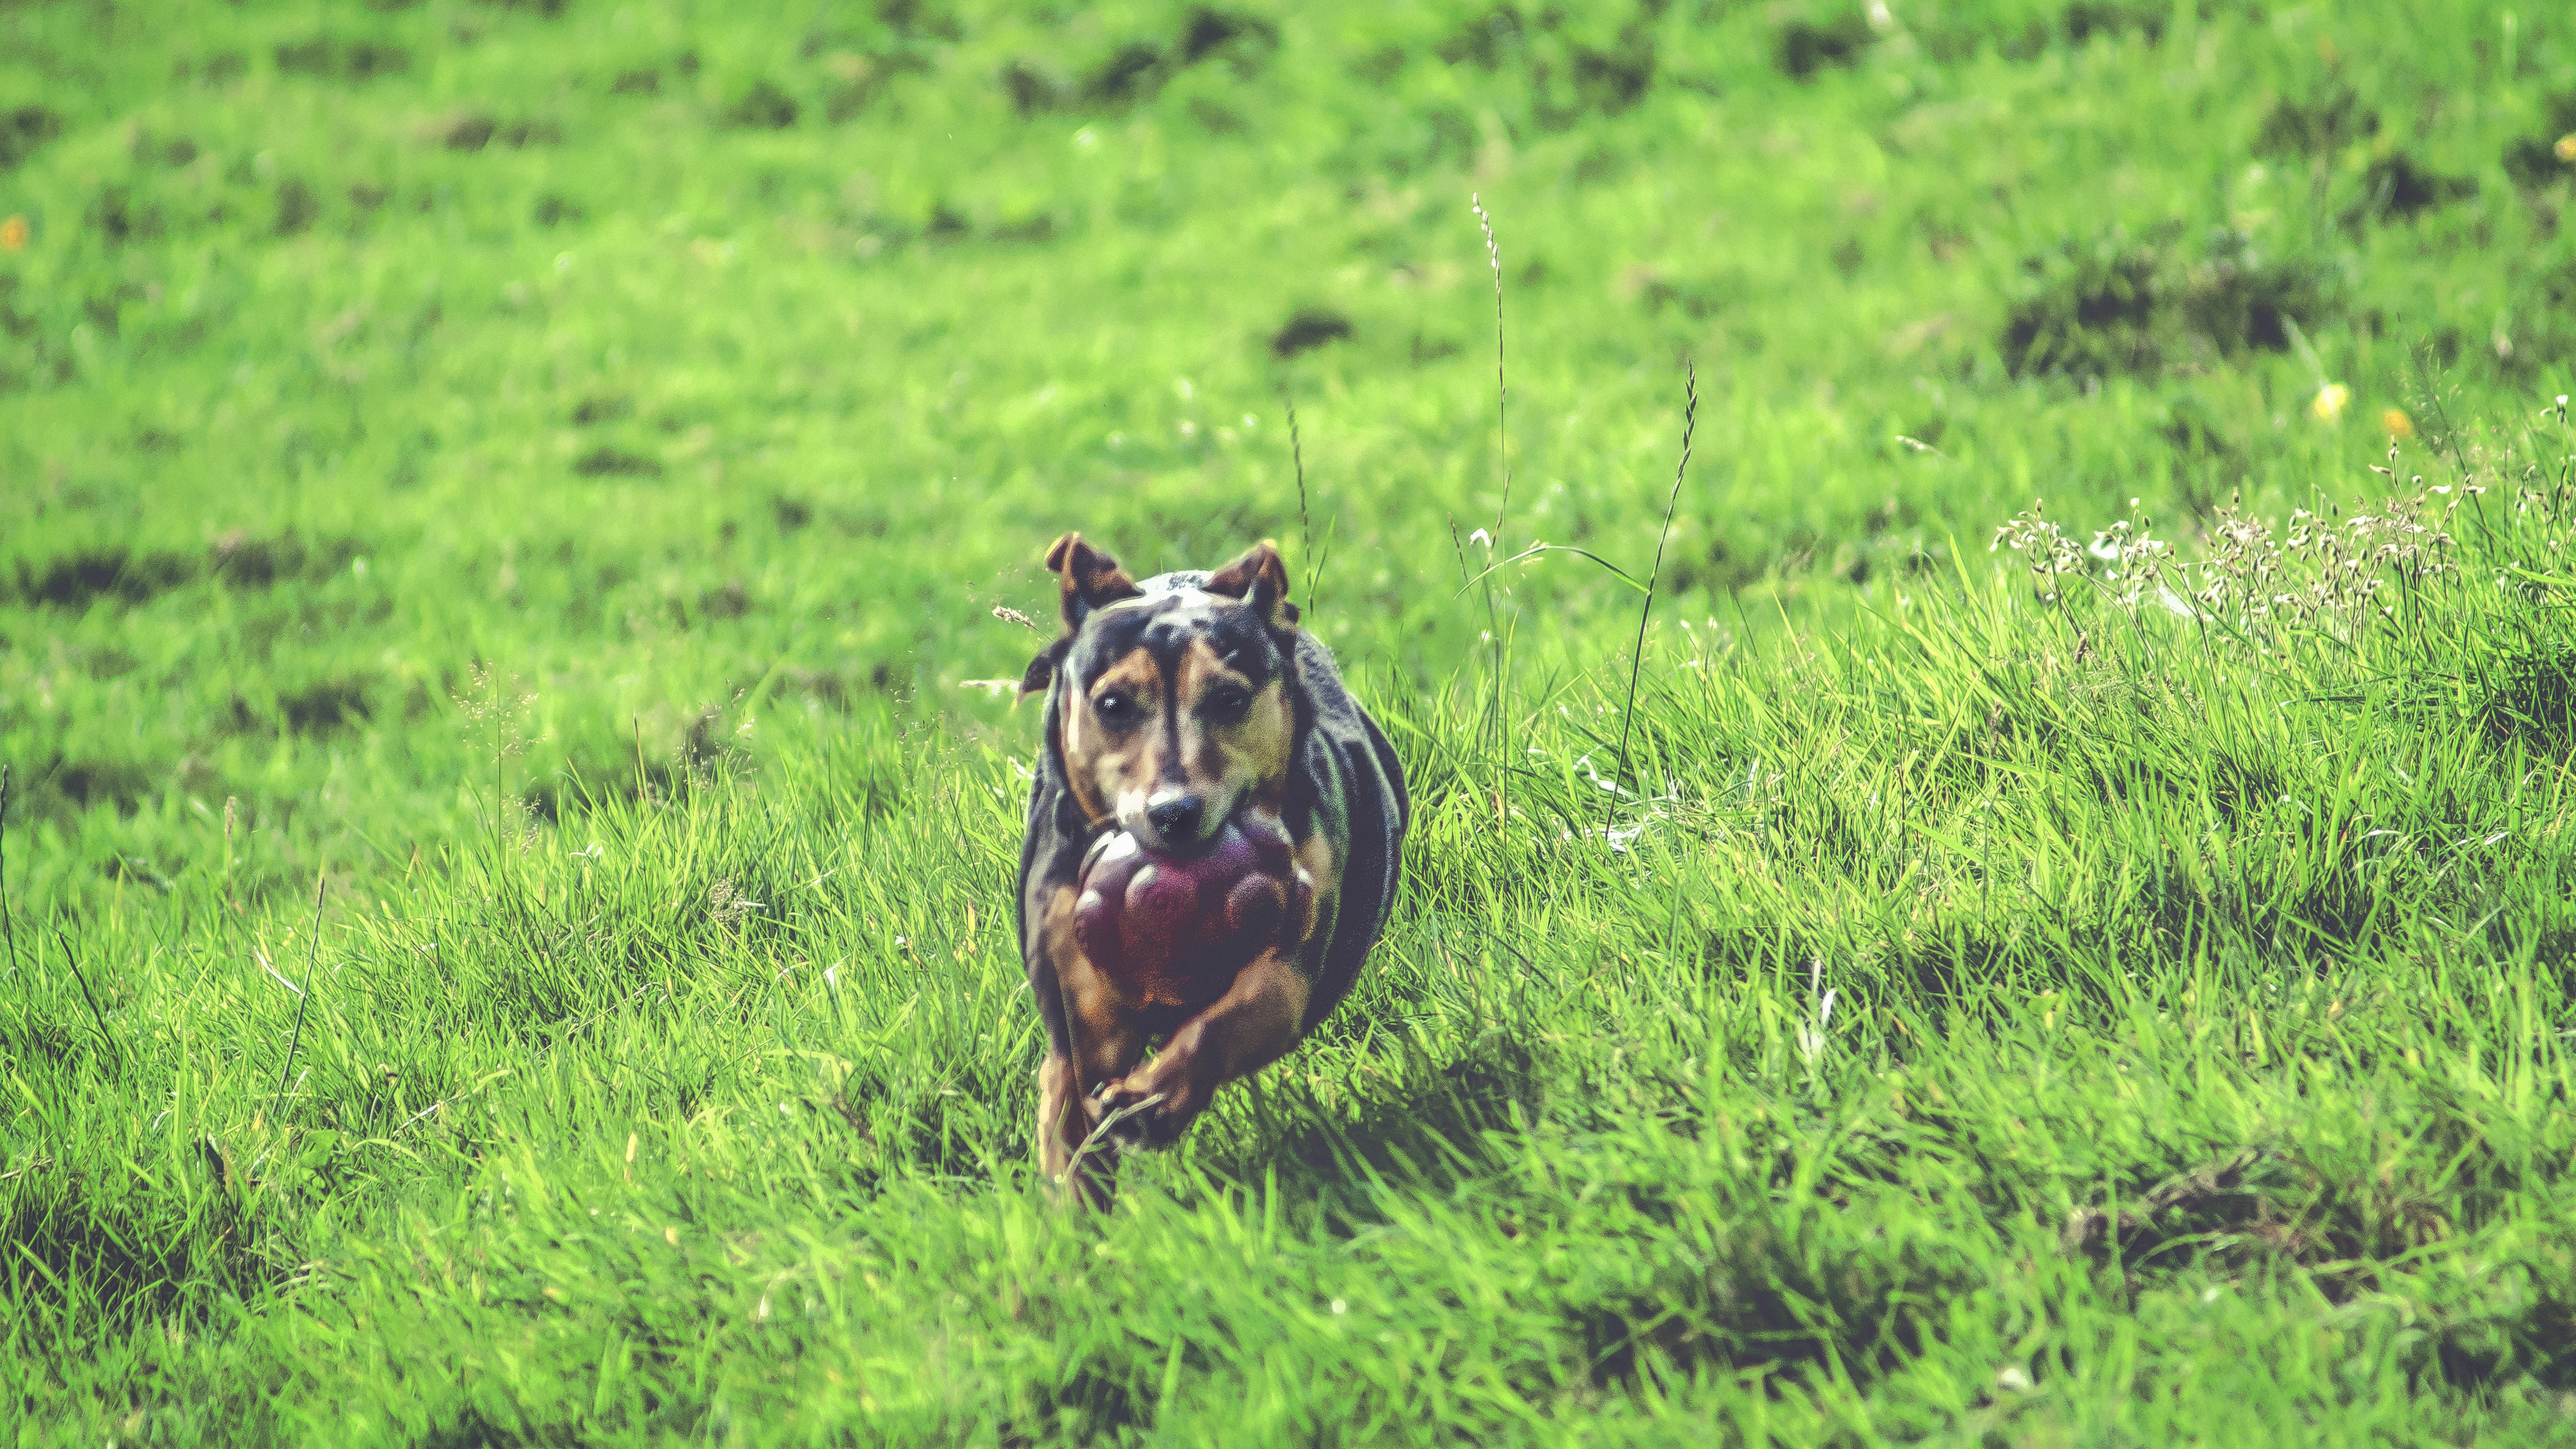 short-coated brown and black dog running in green field